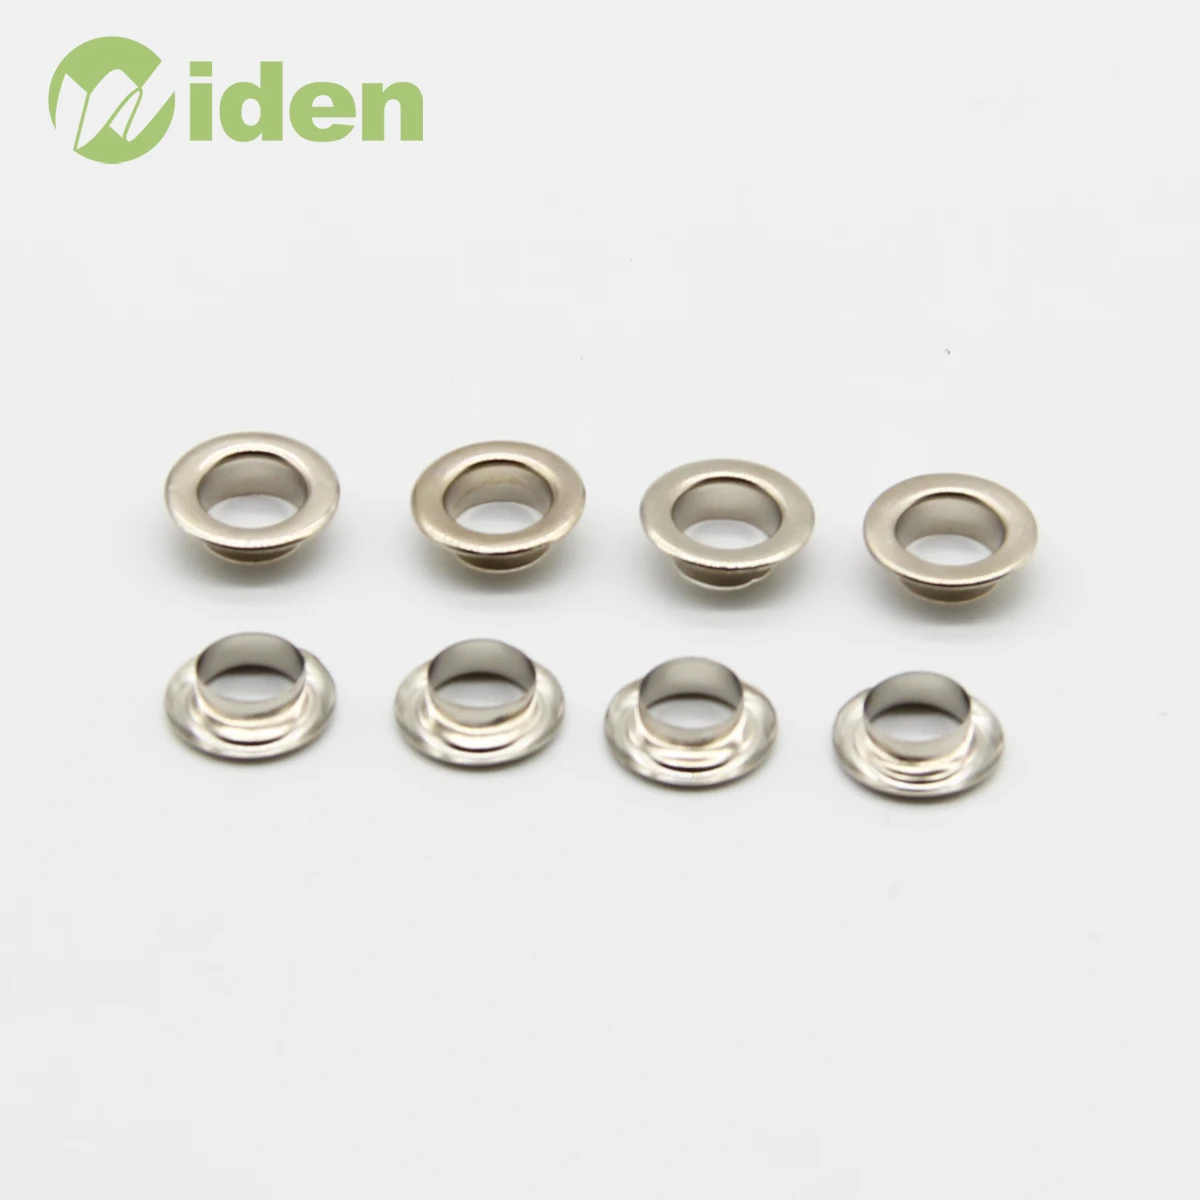 Nickle Free High Quality Brass Metal Shoe Eyelets And Grommet For Clothing